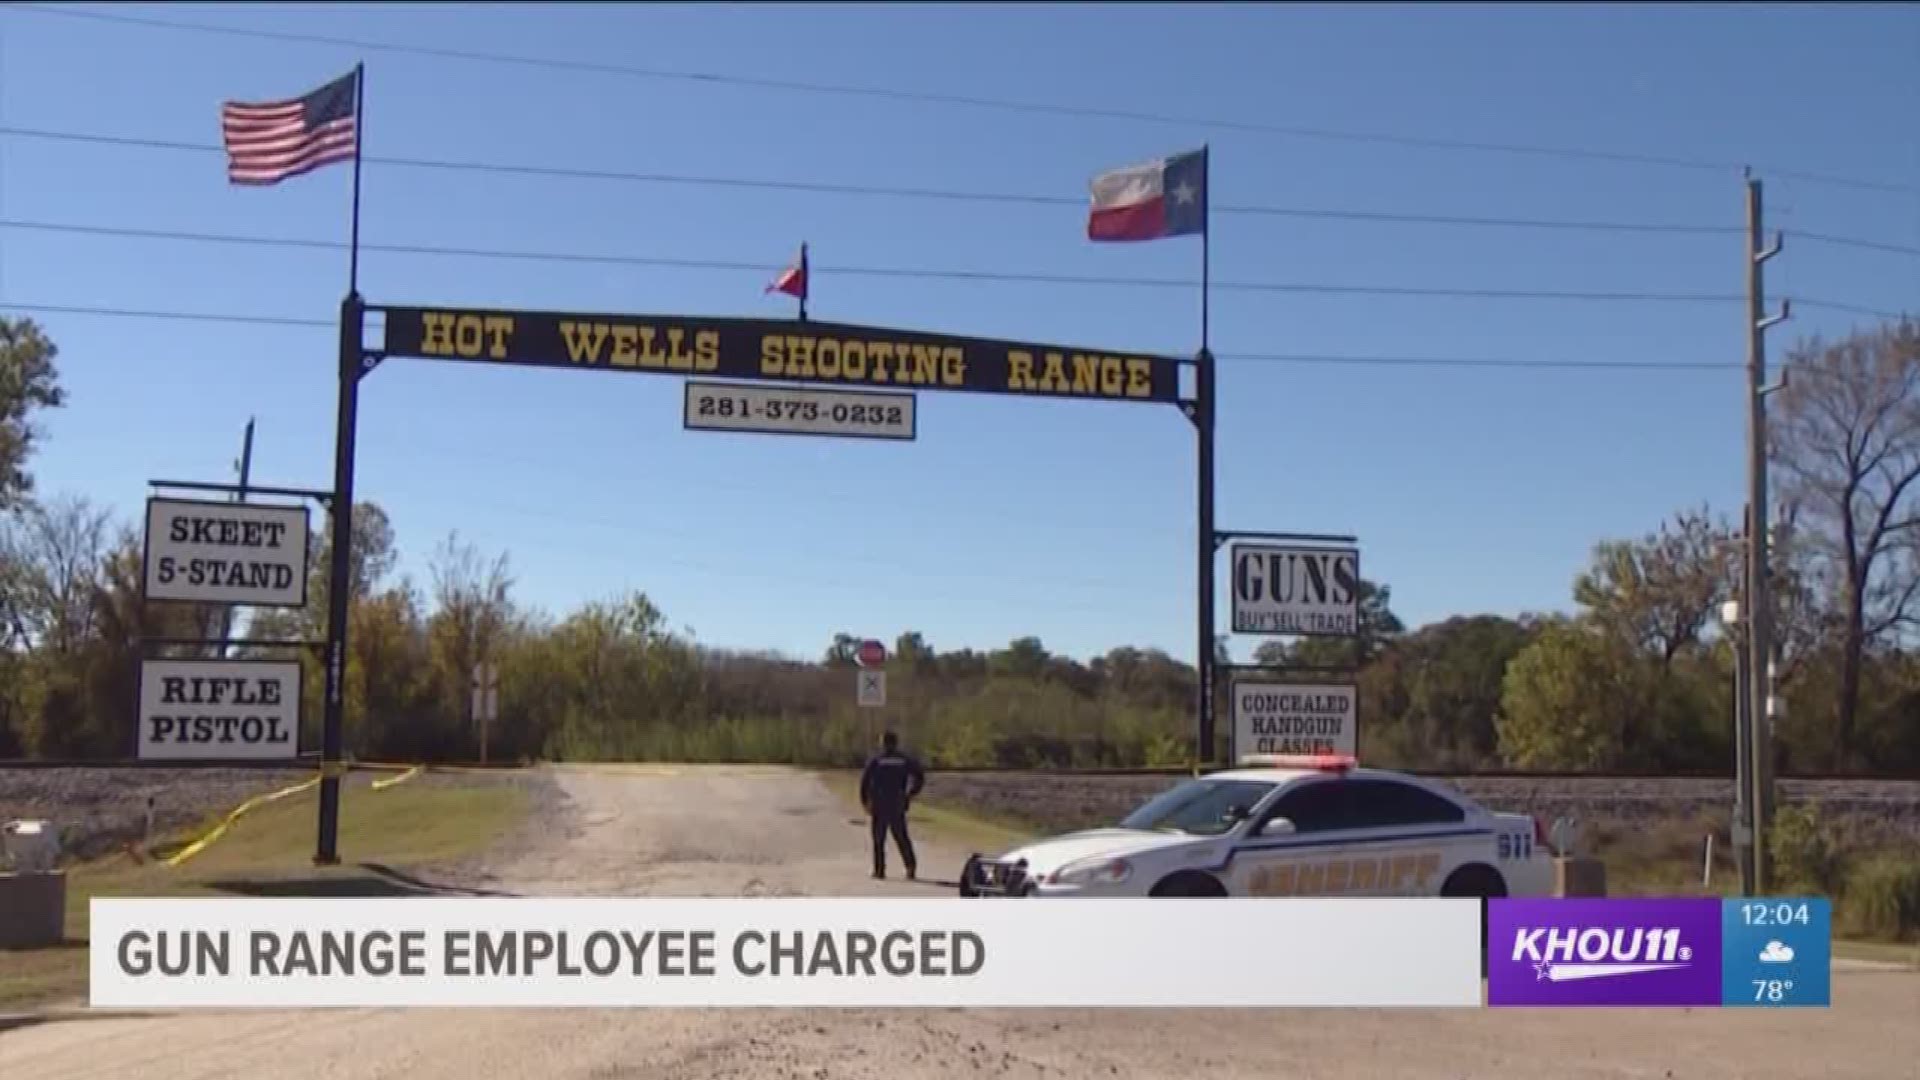 The incident happened at the Hot Wells Shooting Range on Highway 290 near Barker Cypress back in December 2017.